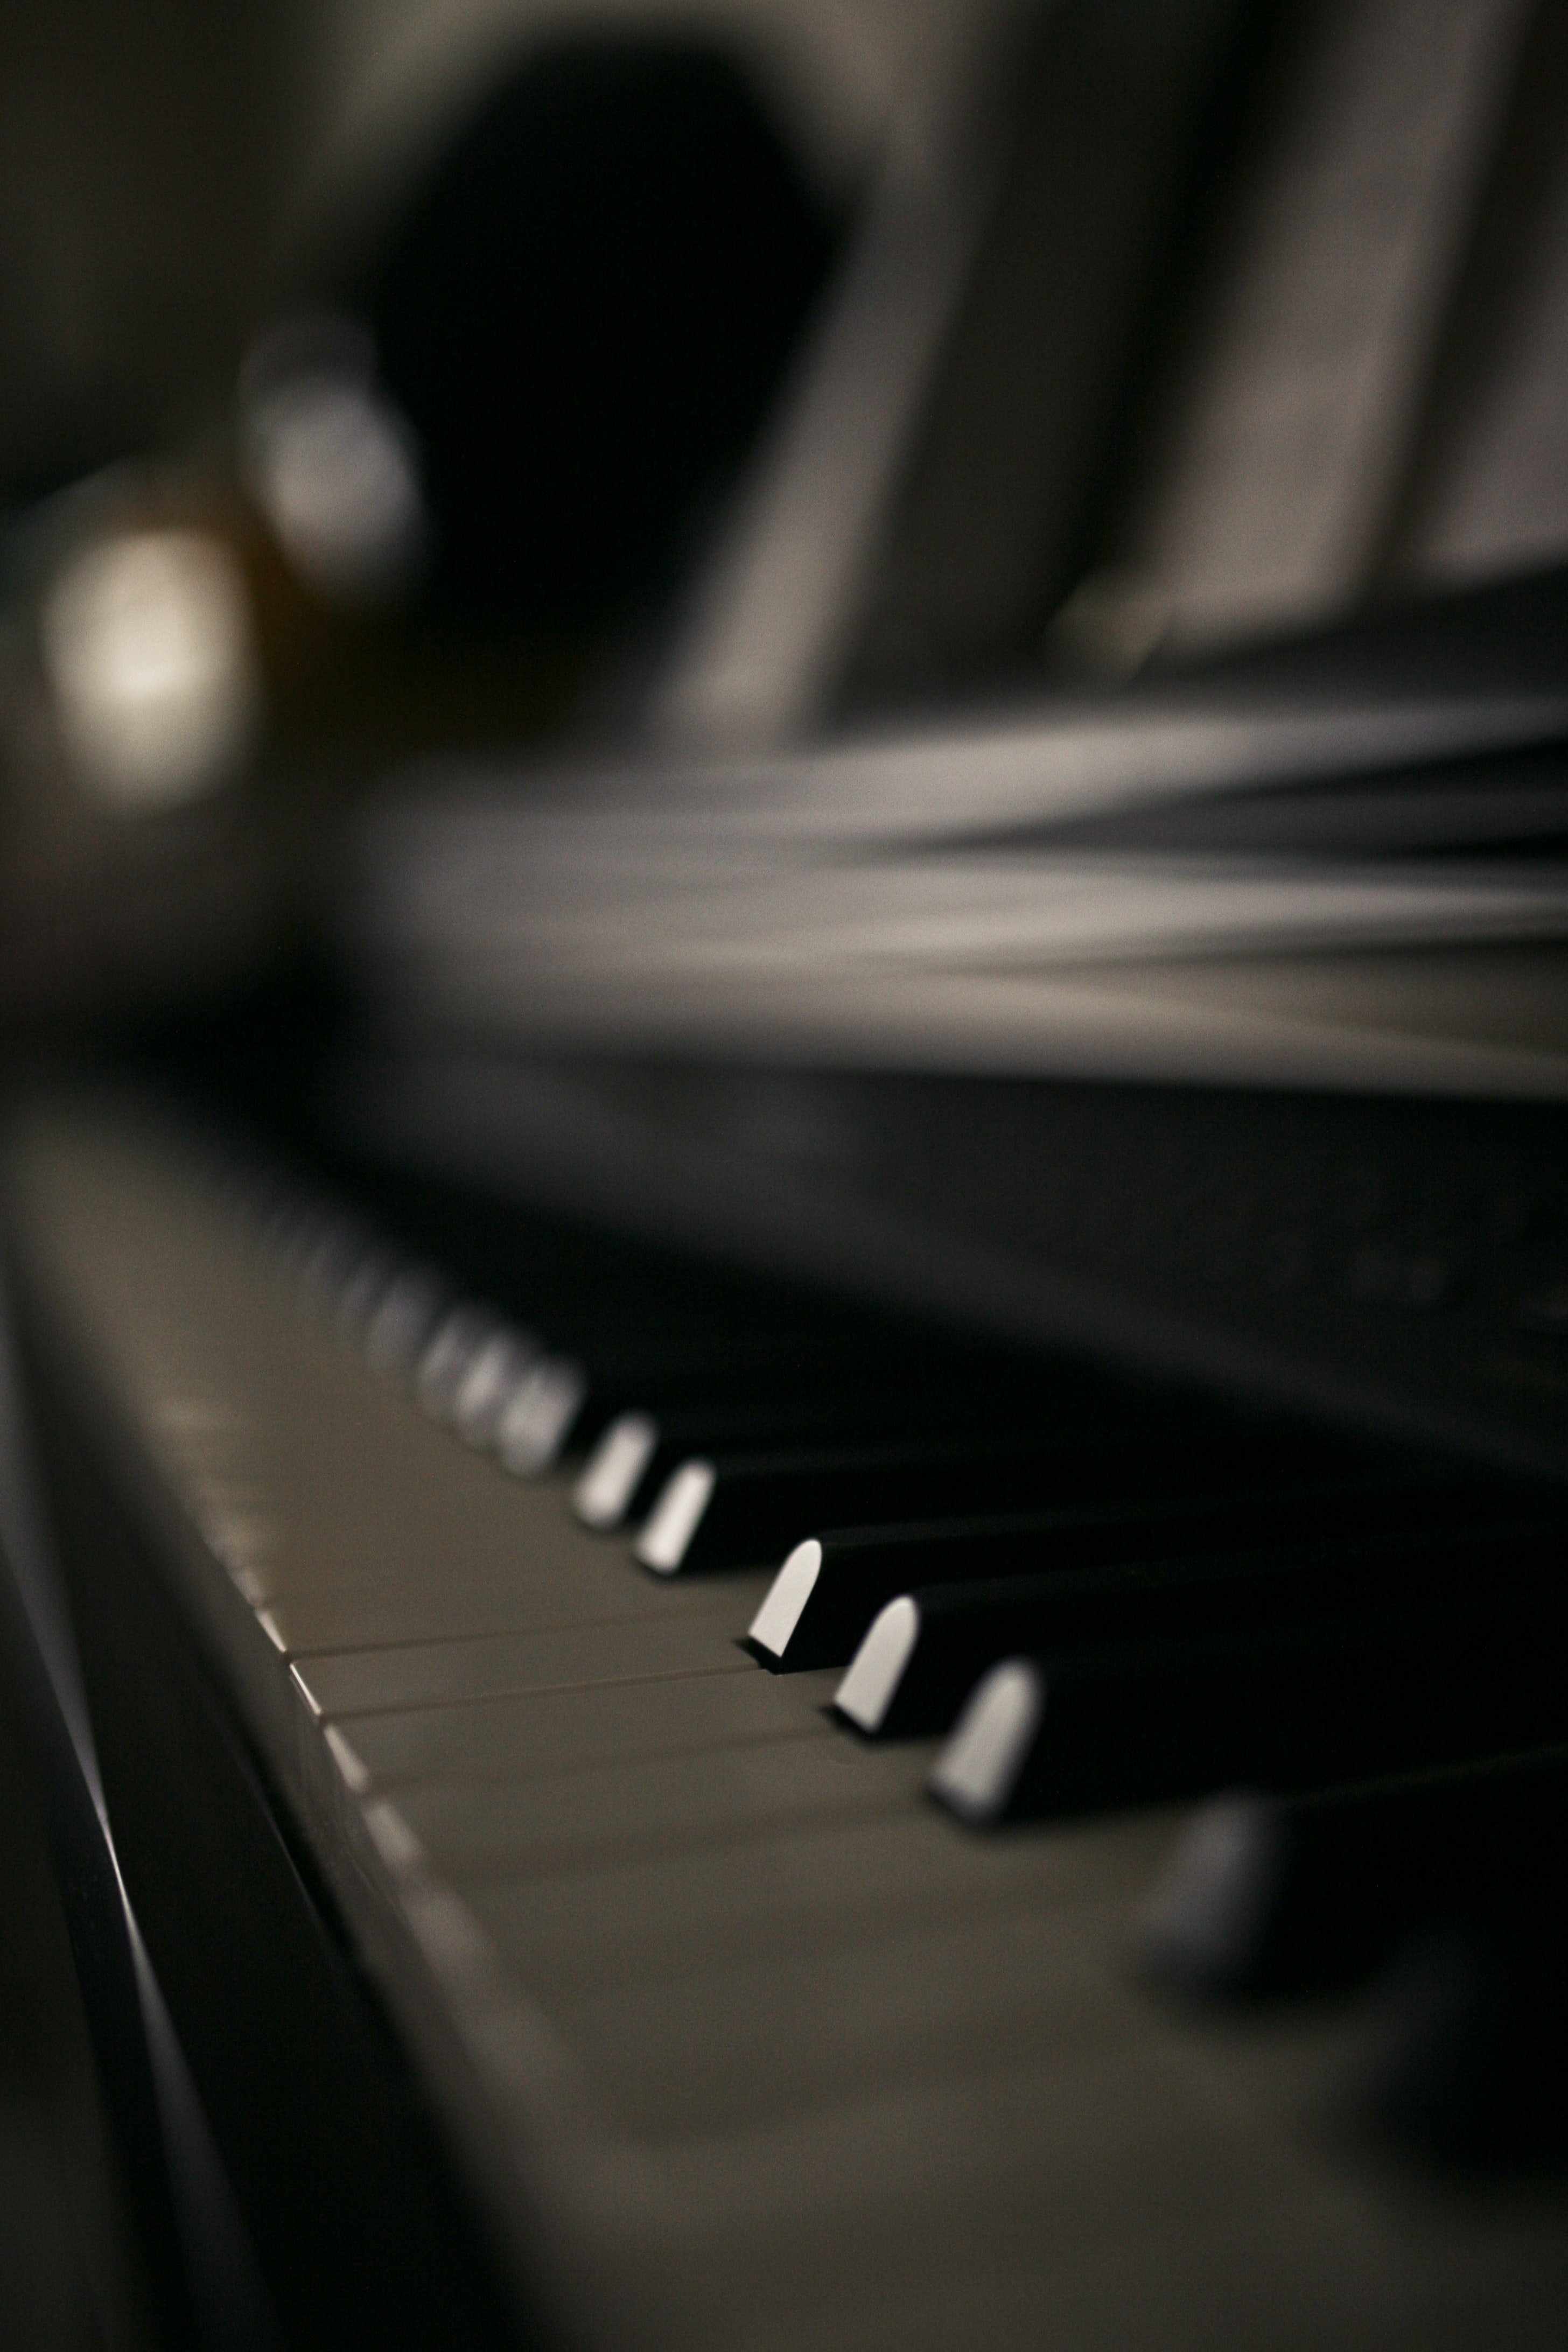 Download for mobile free "Piano" pictures